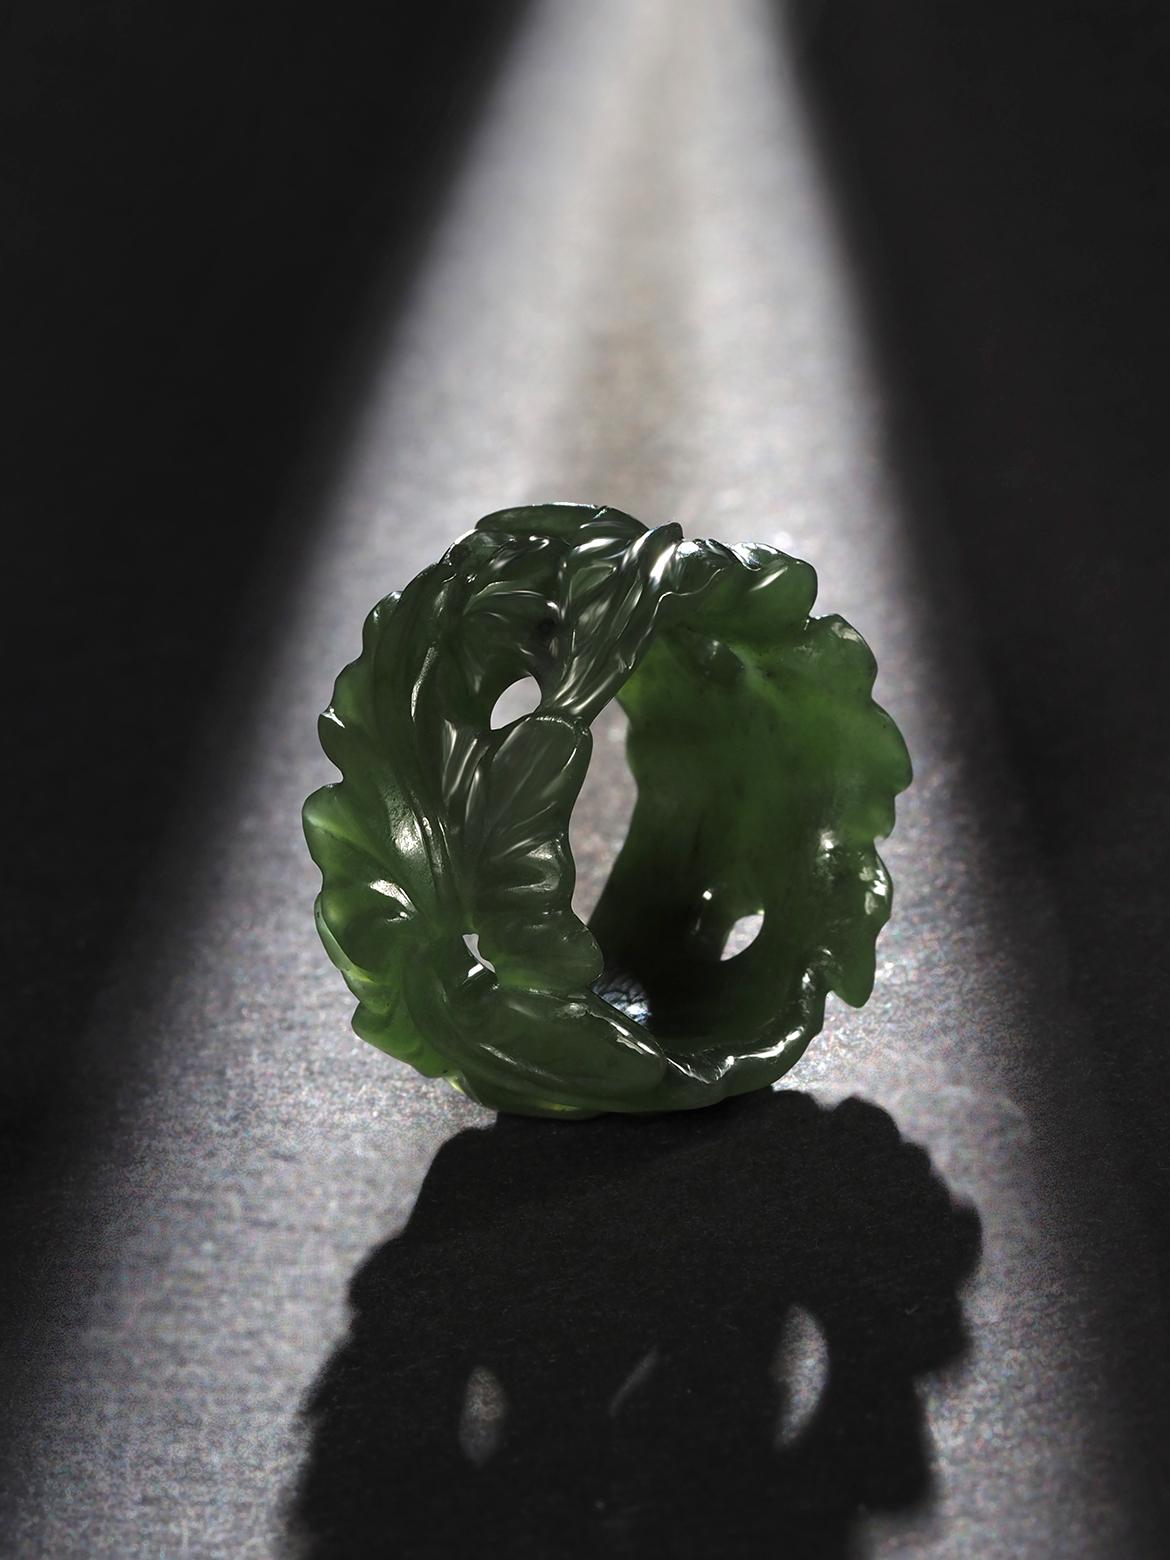 One of a kind green Jade Ivy hand carved ring, made in Paris
ring size - 8.25 US
ring weight 9 grams

Introducing our exquisite Jade ring from the Ivy collection, a true work of art handcrafted in the artisanal atelier in Paris. This bold and